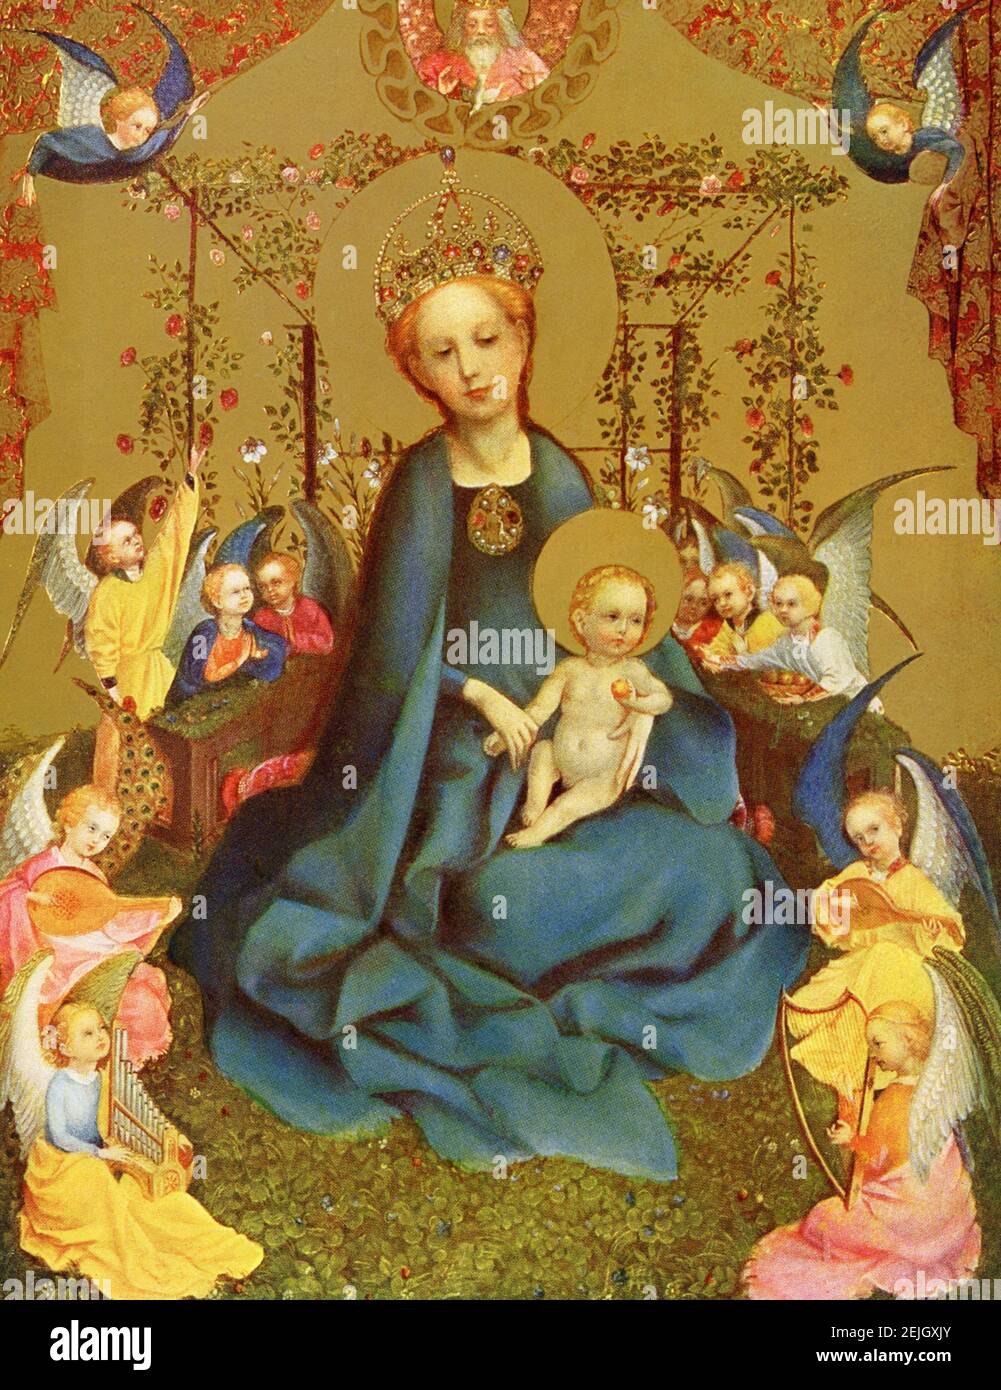 This image shows the panel-painting Madonna in the Rose Garden (also known as Madonna of the Rose Bower and Virgin of the Rose Bower)  by the German artist Stephan Lochner, which is housed in the Wallraf-Richartz Museum in Cologne, Germany. It is usually dated c 1440-42, although some art historians believe it contemporaneous with his later Dombild Altarpiece. It is usually seen as one of his finest and most closely detailed works. Stock Photo